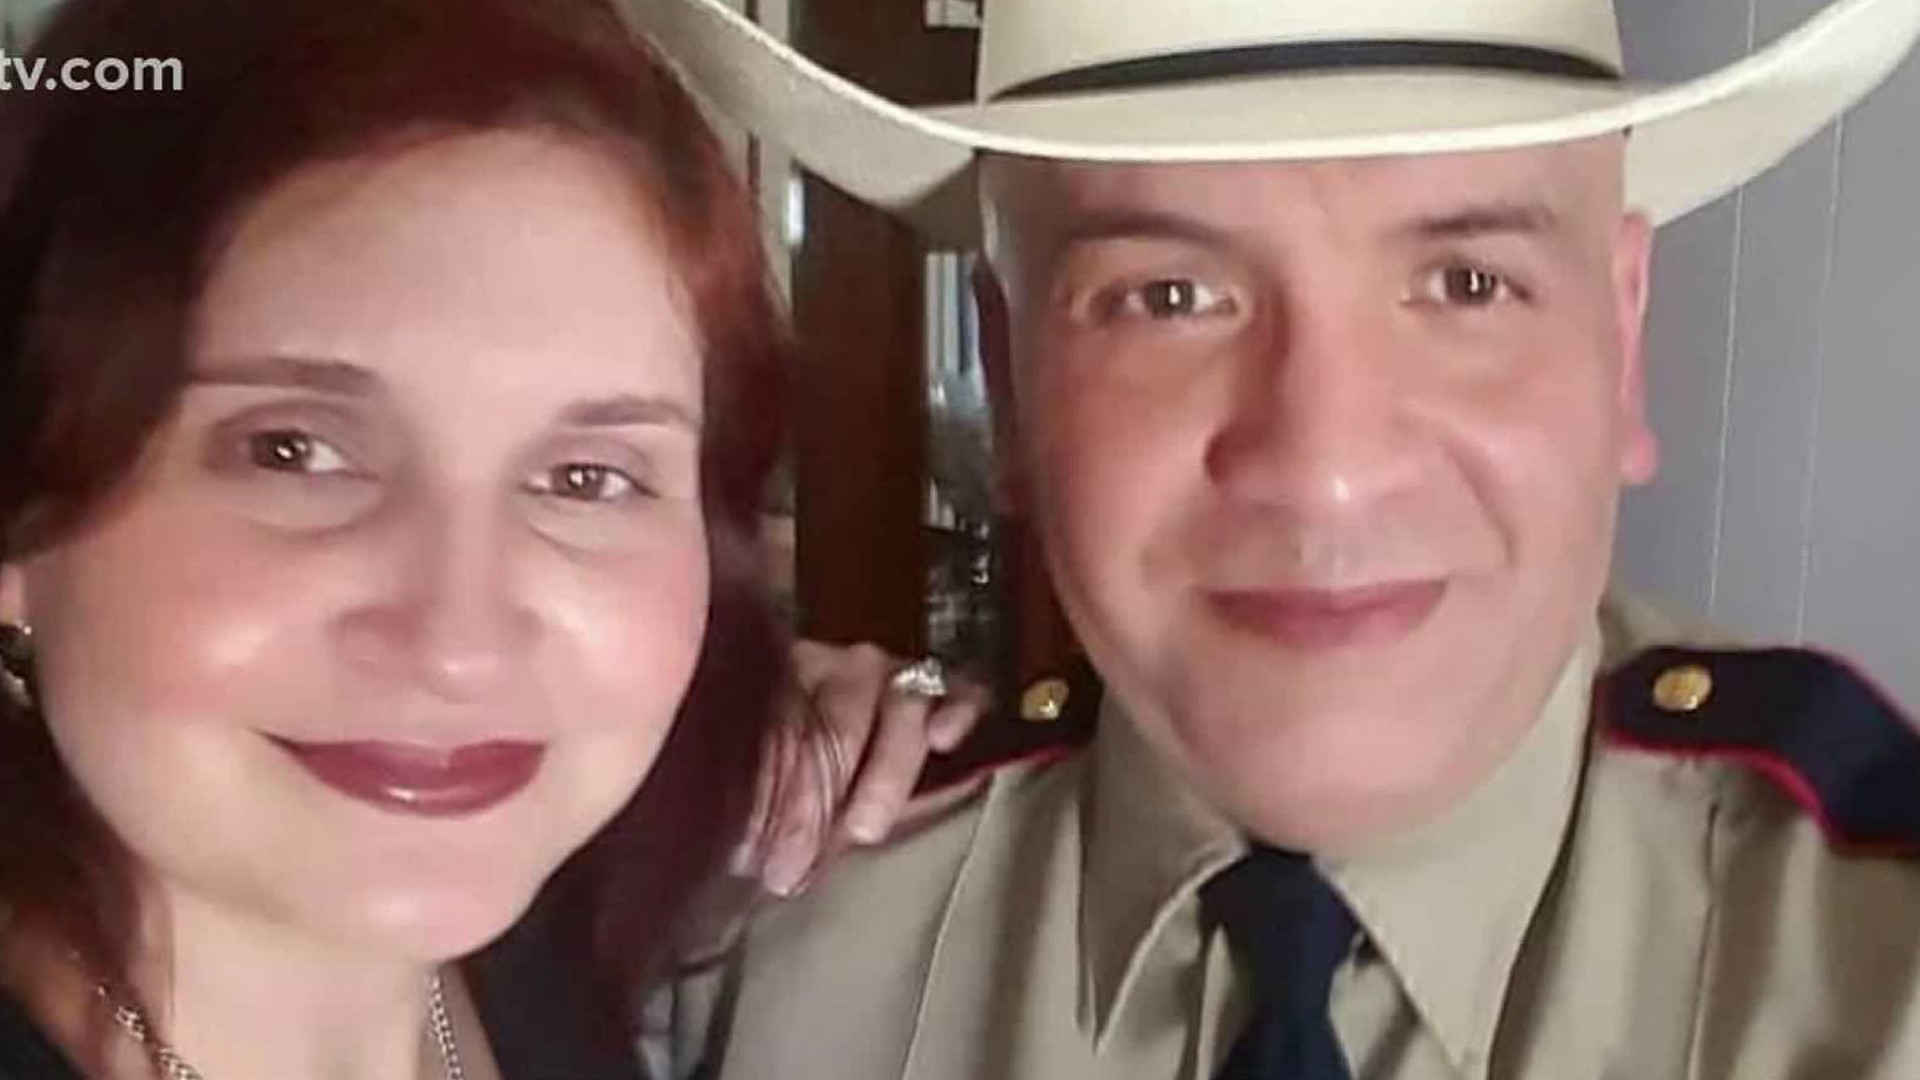 The widow of Raul Salazar is speaking out for the first time since the passing of her husband.